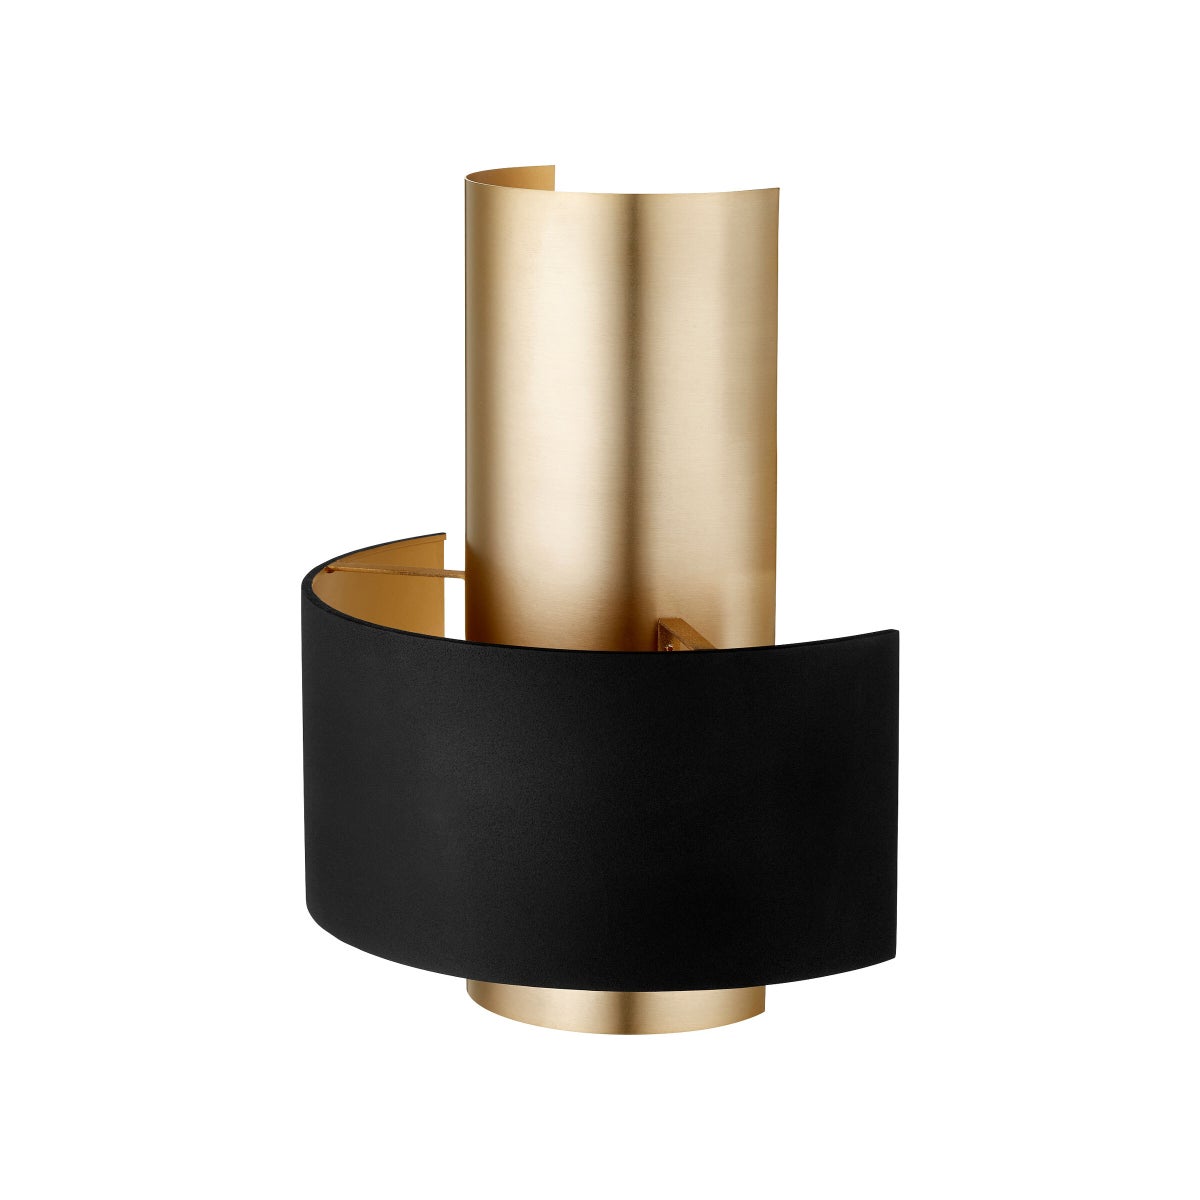 Half Cylinder Two-Toned Black/Aged Brass Wall Sconce